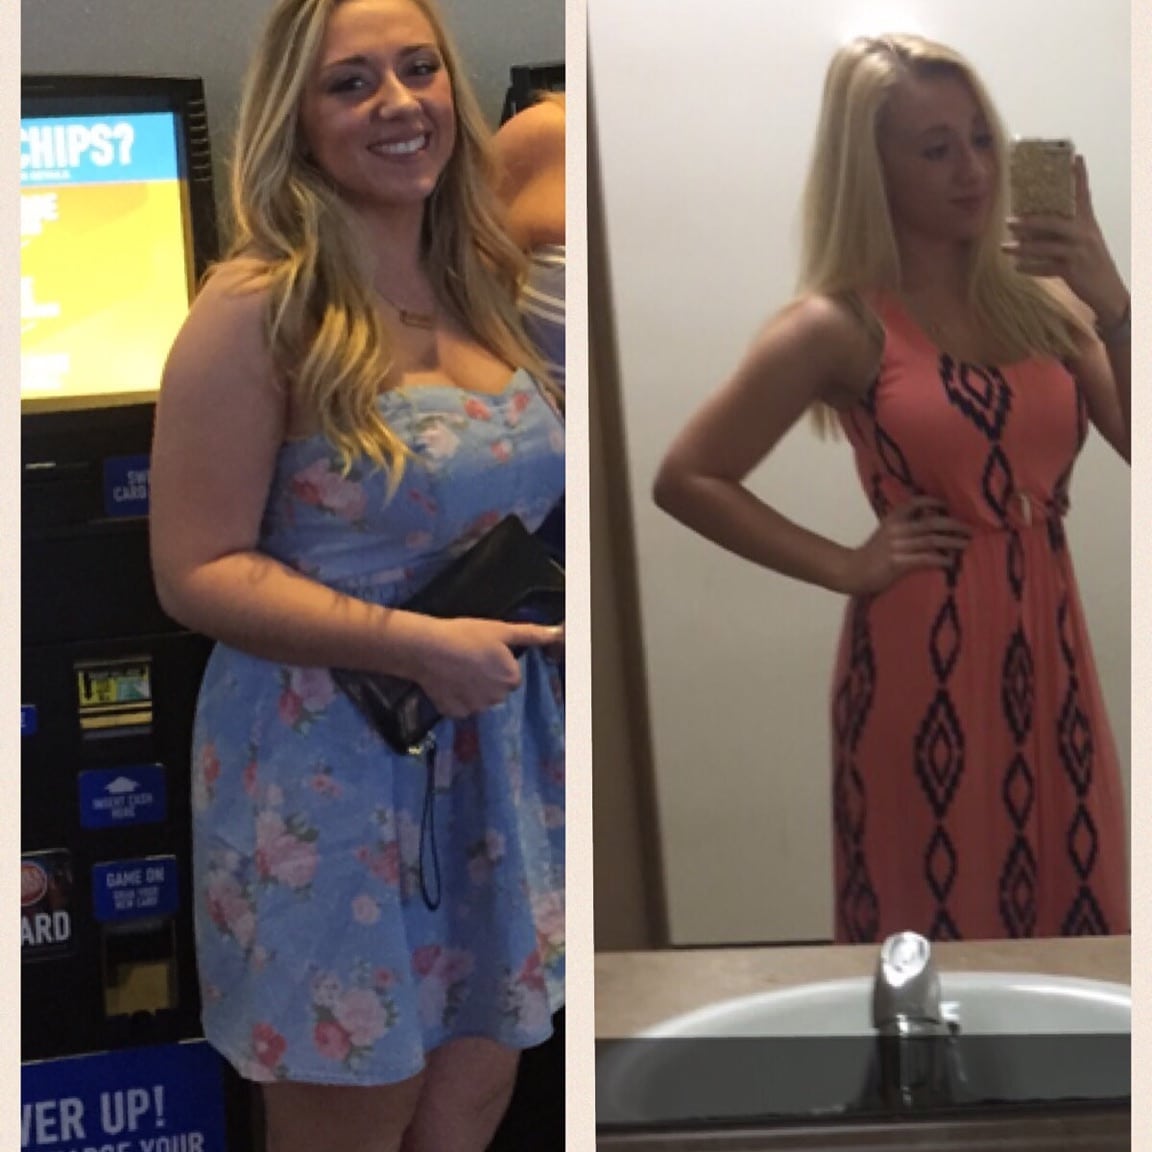 Sophomore year to Junior year after finding out I had PCOS